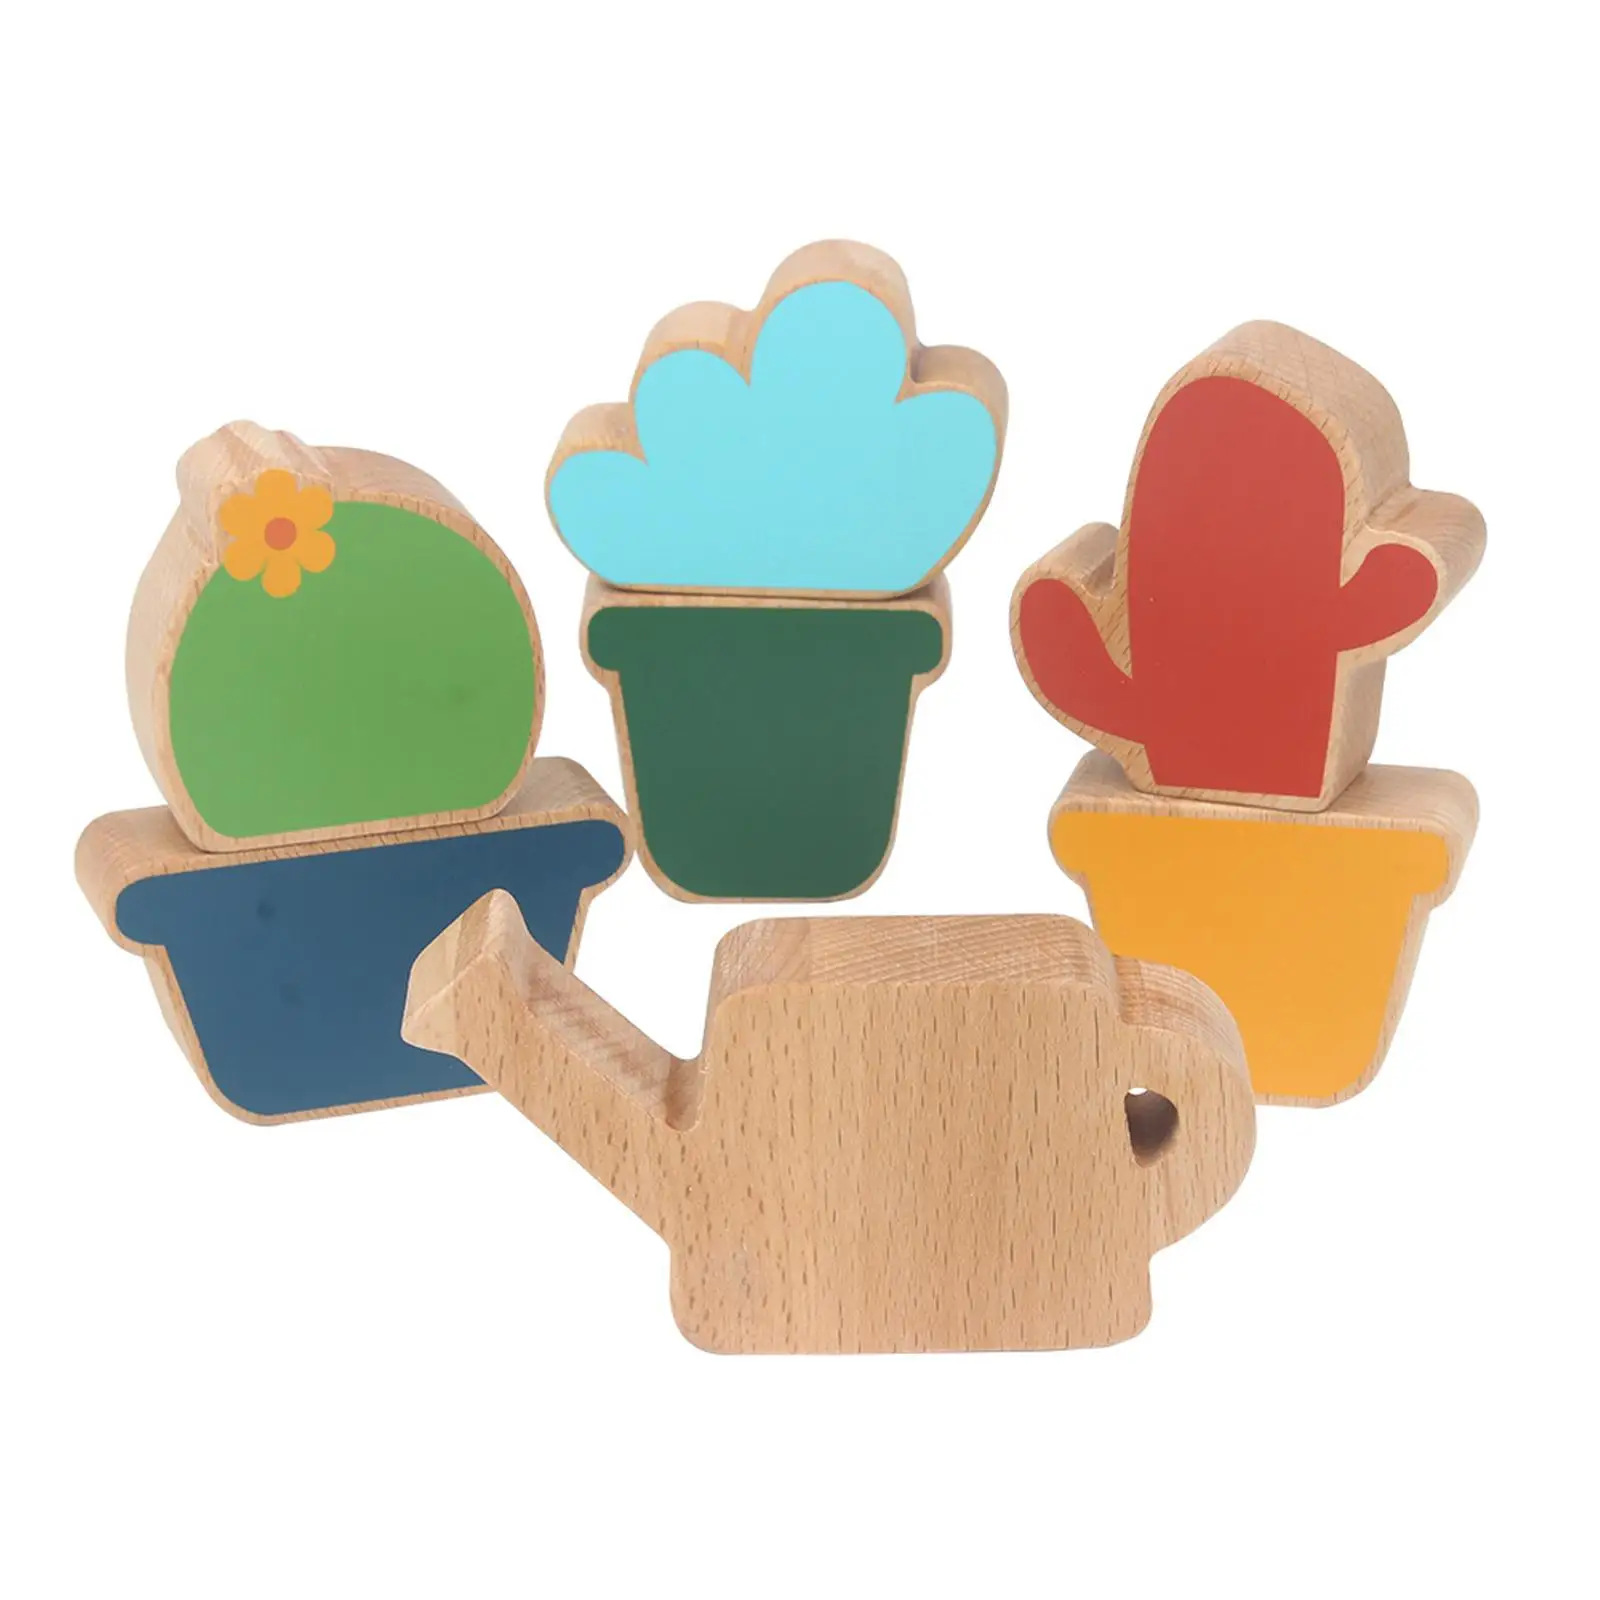 7 Pieces Wooden Potted Balance Blocks Preschool Learning Board Games for Boys Girls